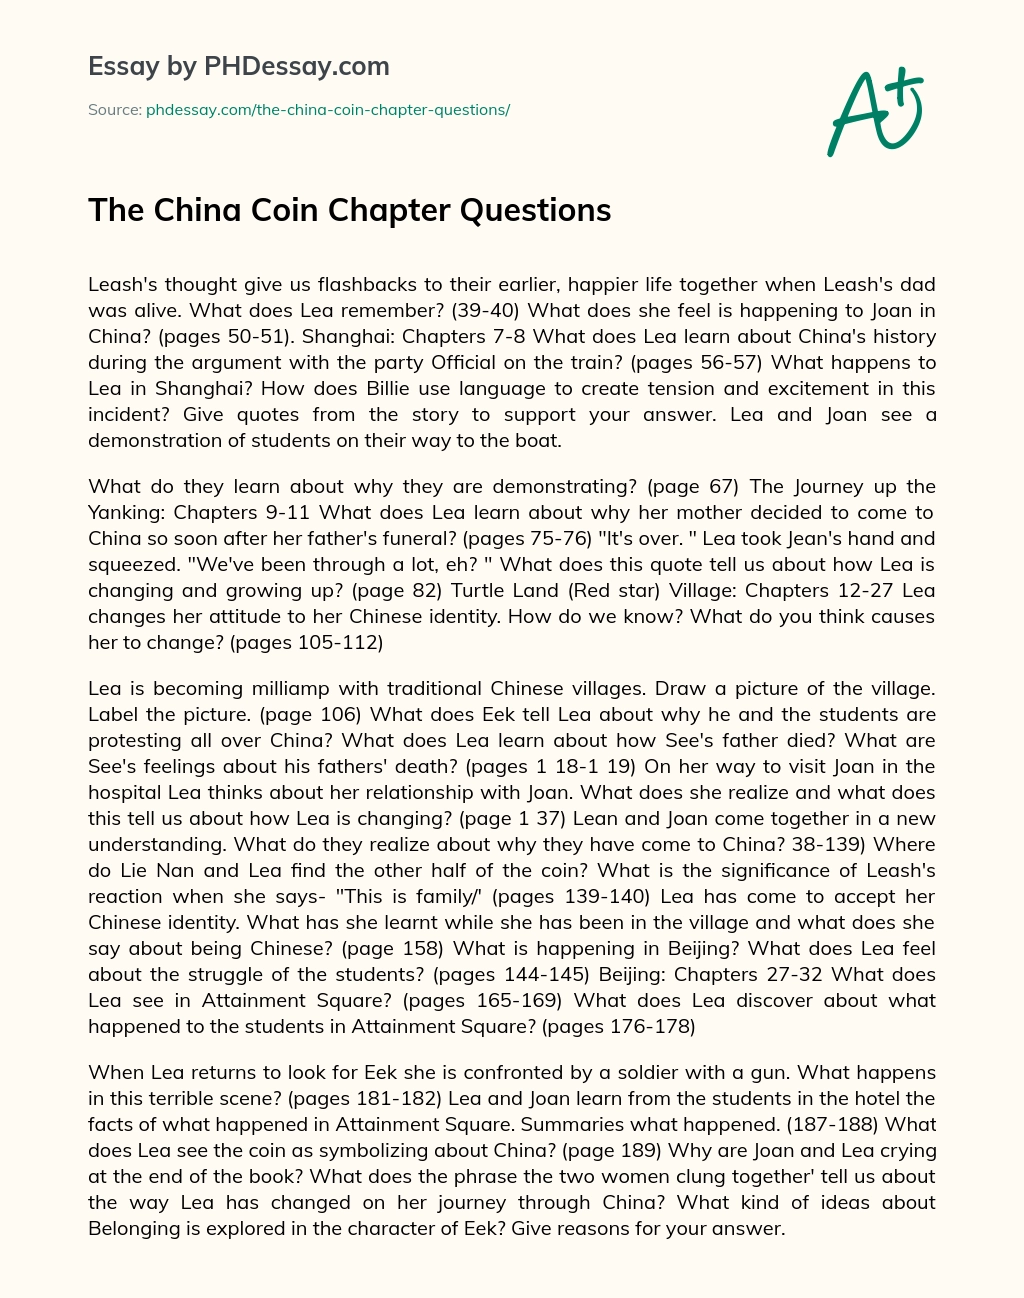 The China Coin Chapter Questions essay